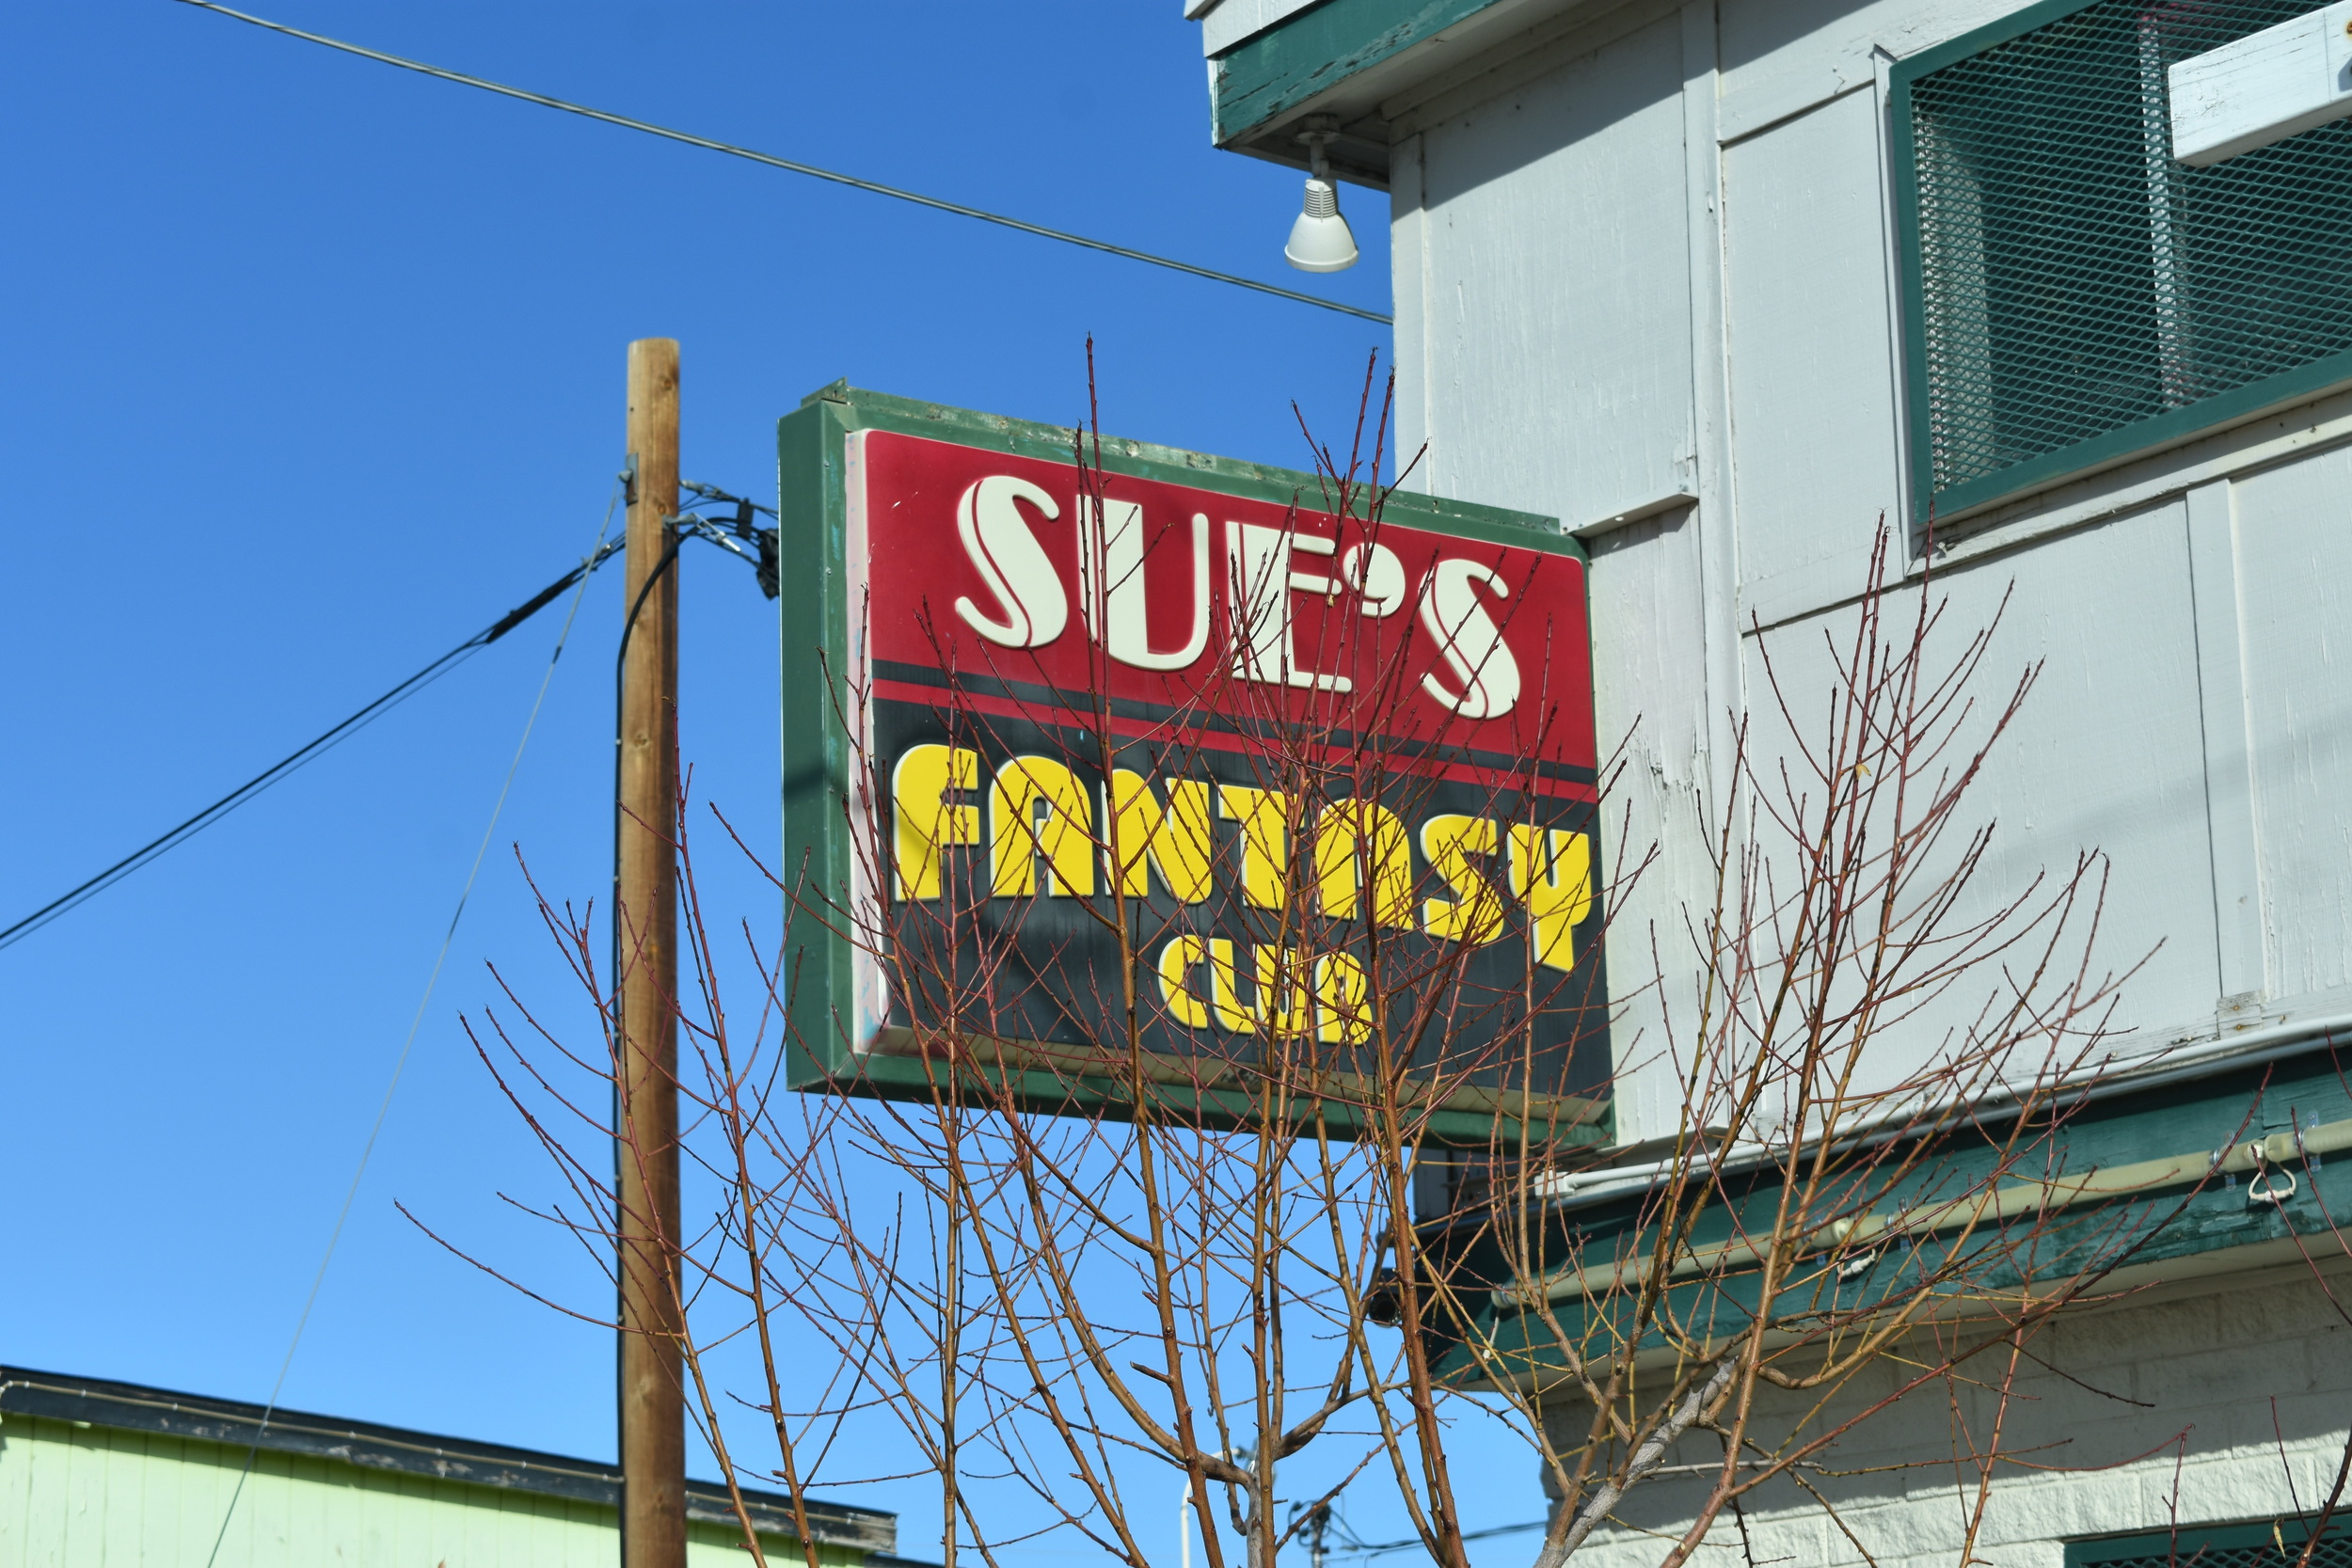 Sue's Fantasy Club flag and other wall mounted signs, Elko, Nevada